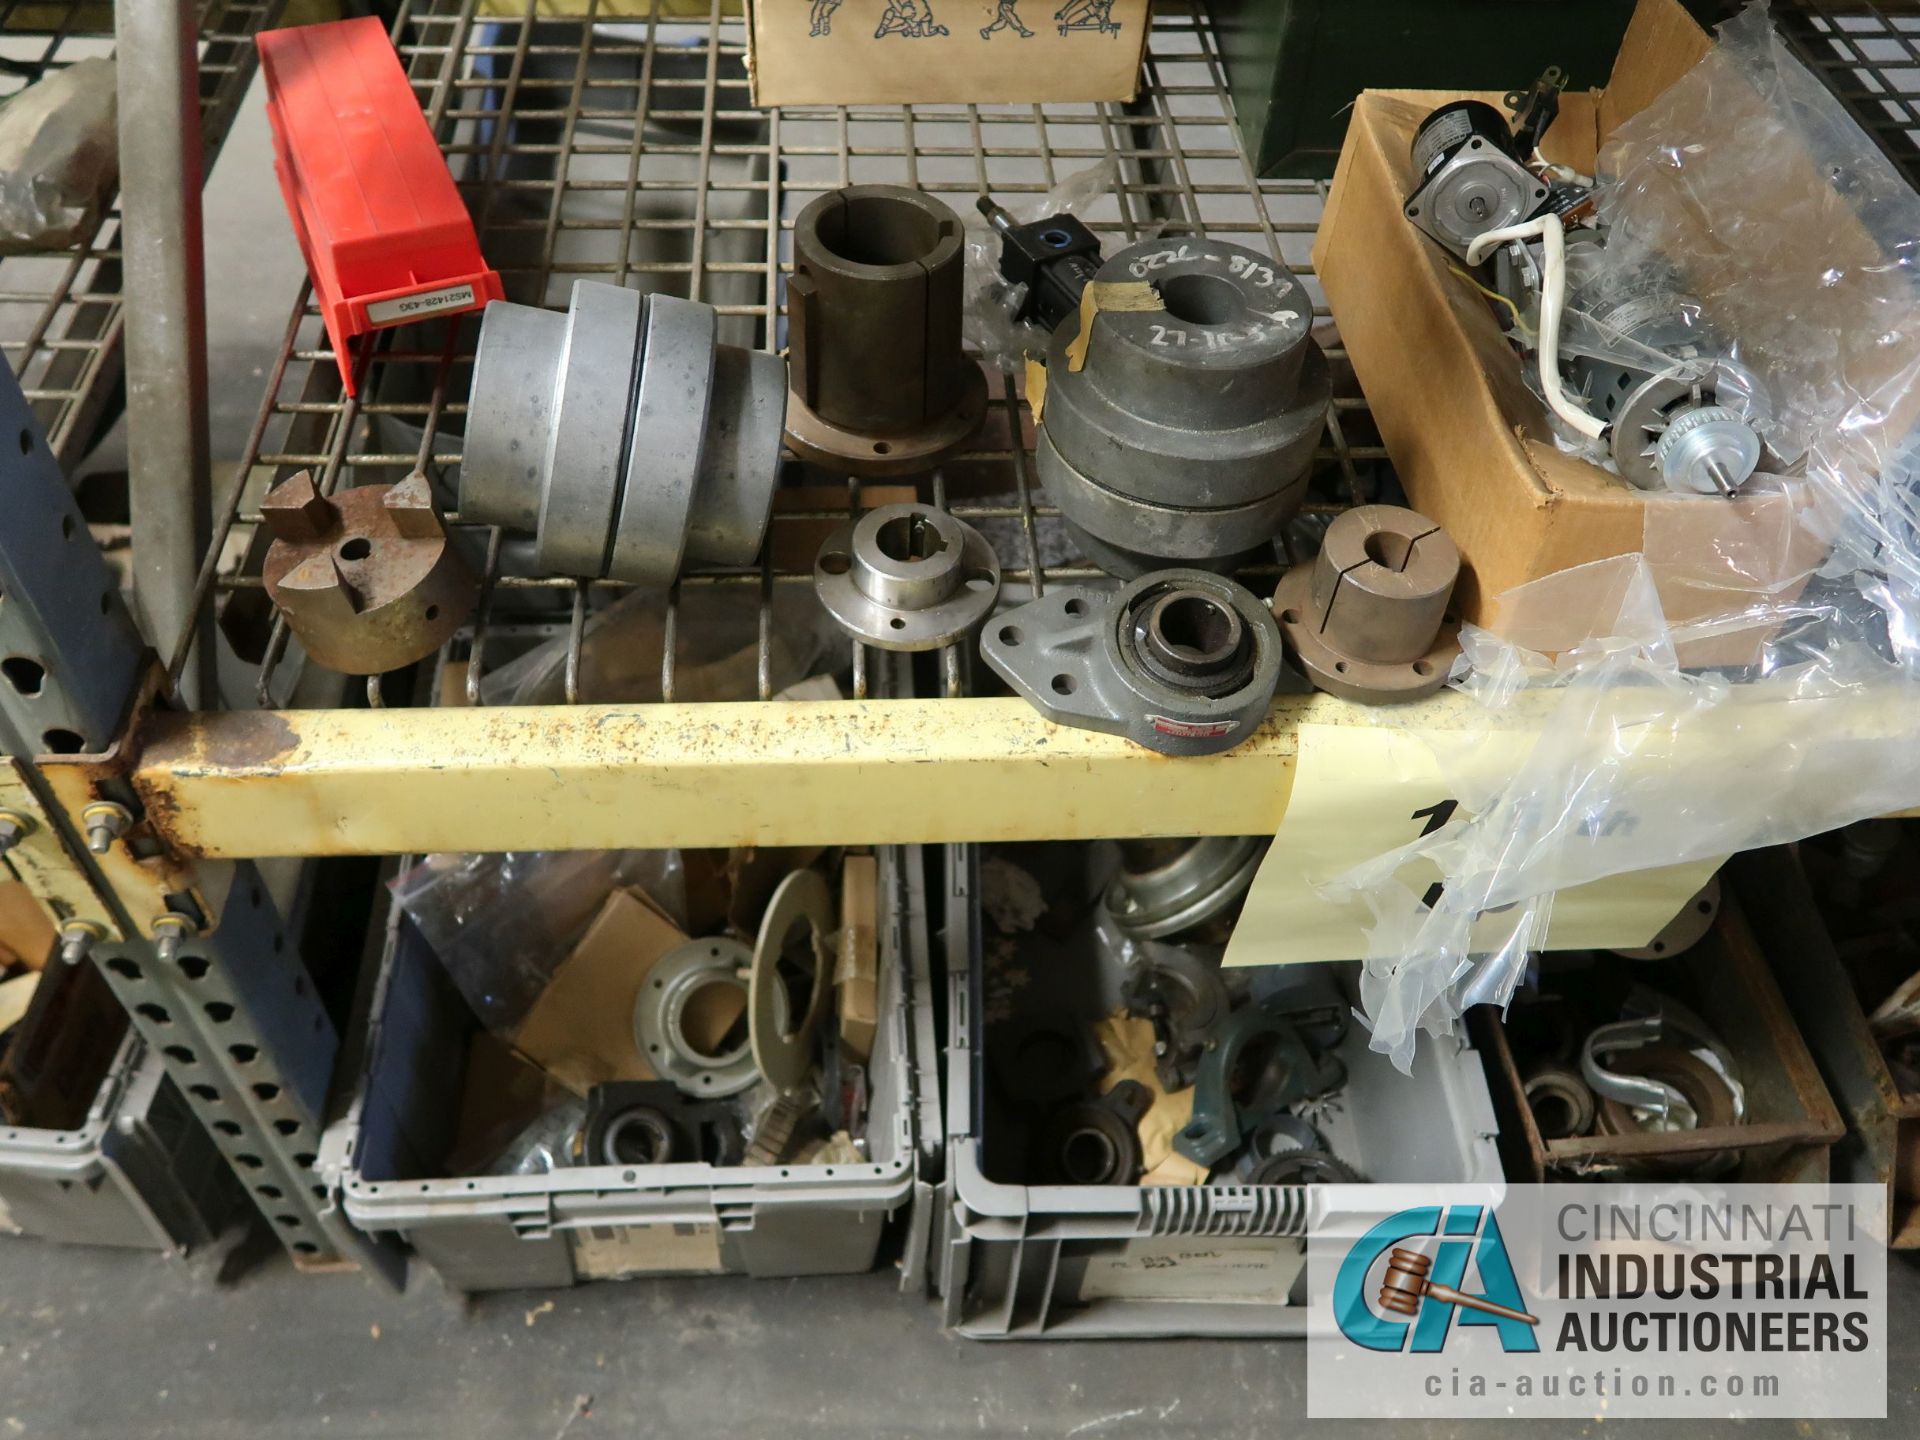 (LOT) CONTENTS OF (1) SECTION RACK GEARS, MOTORS, ELECTRICAL - Image 2 of 10